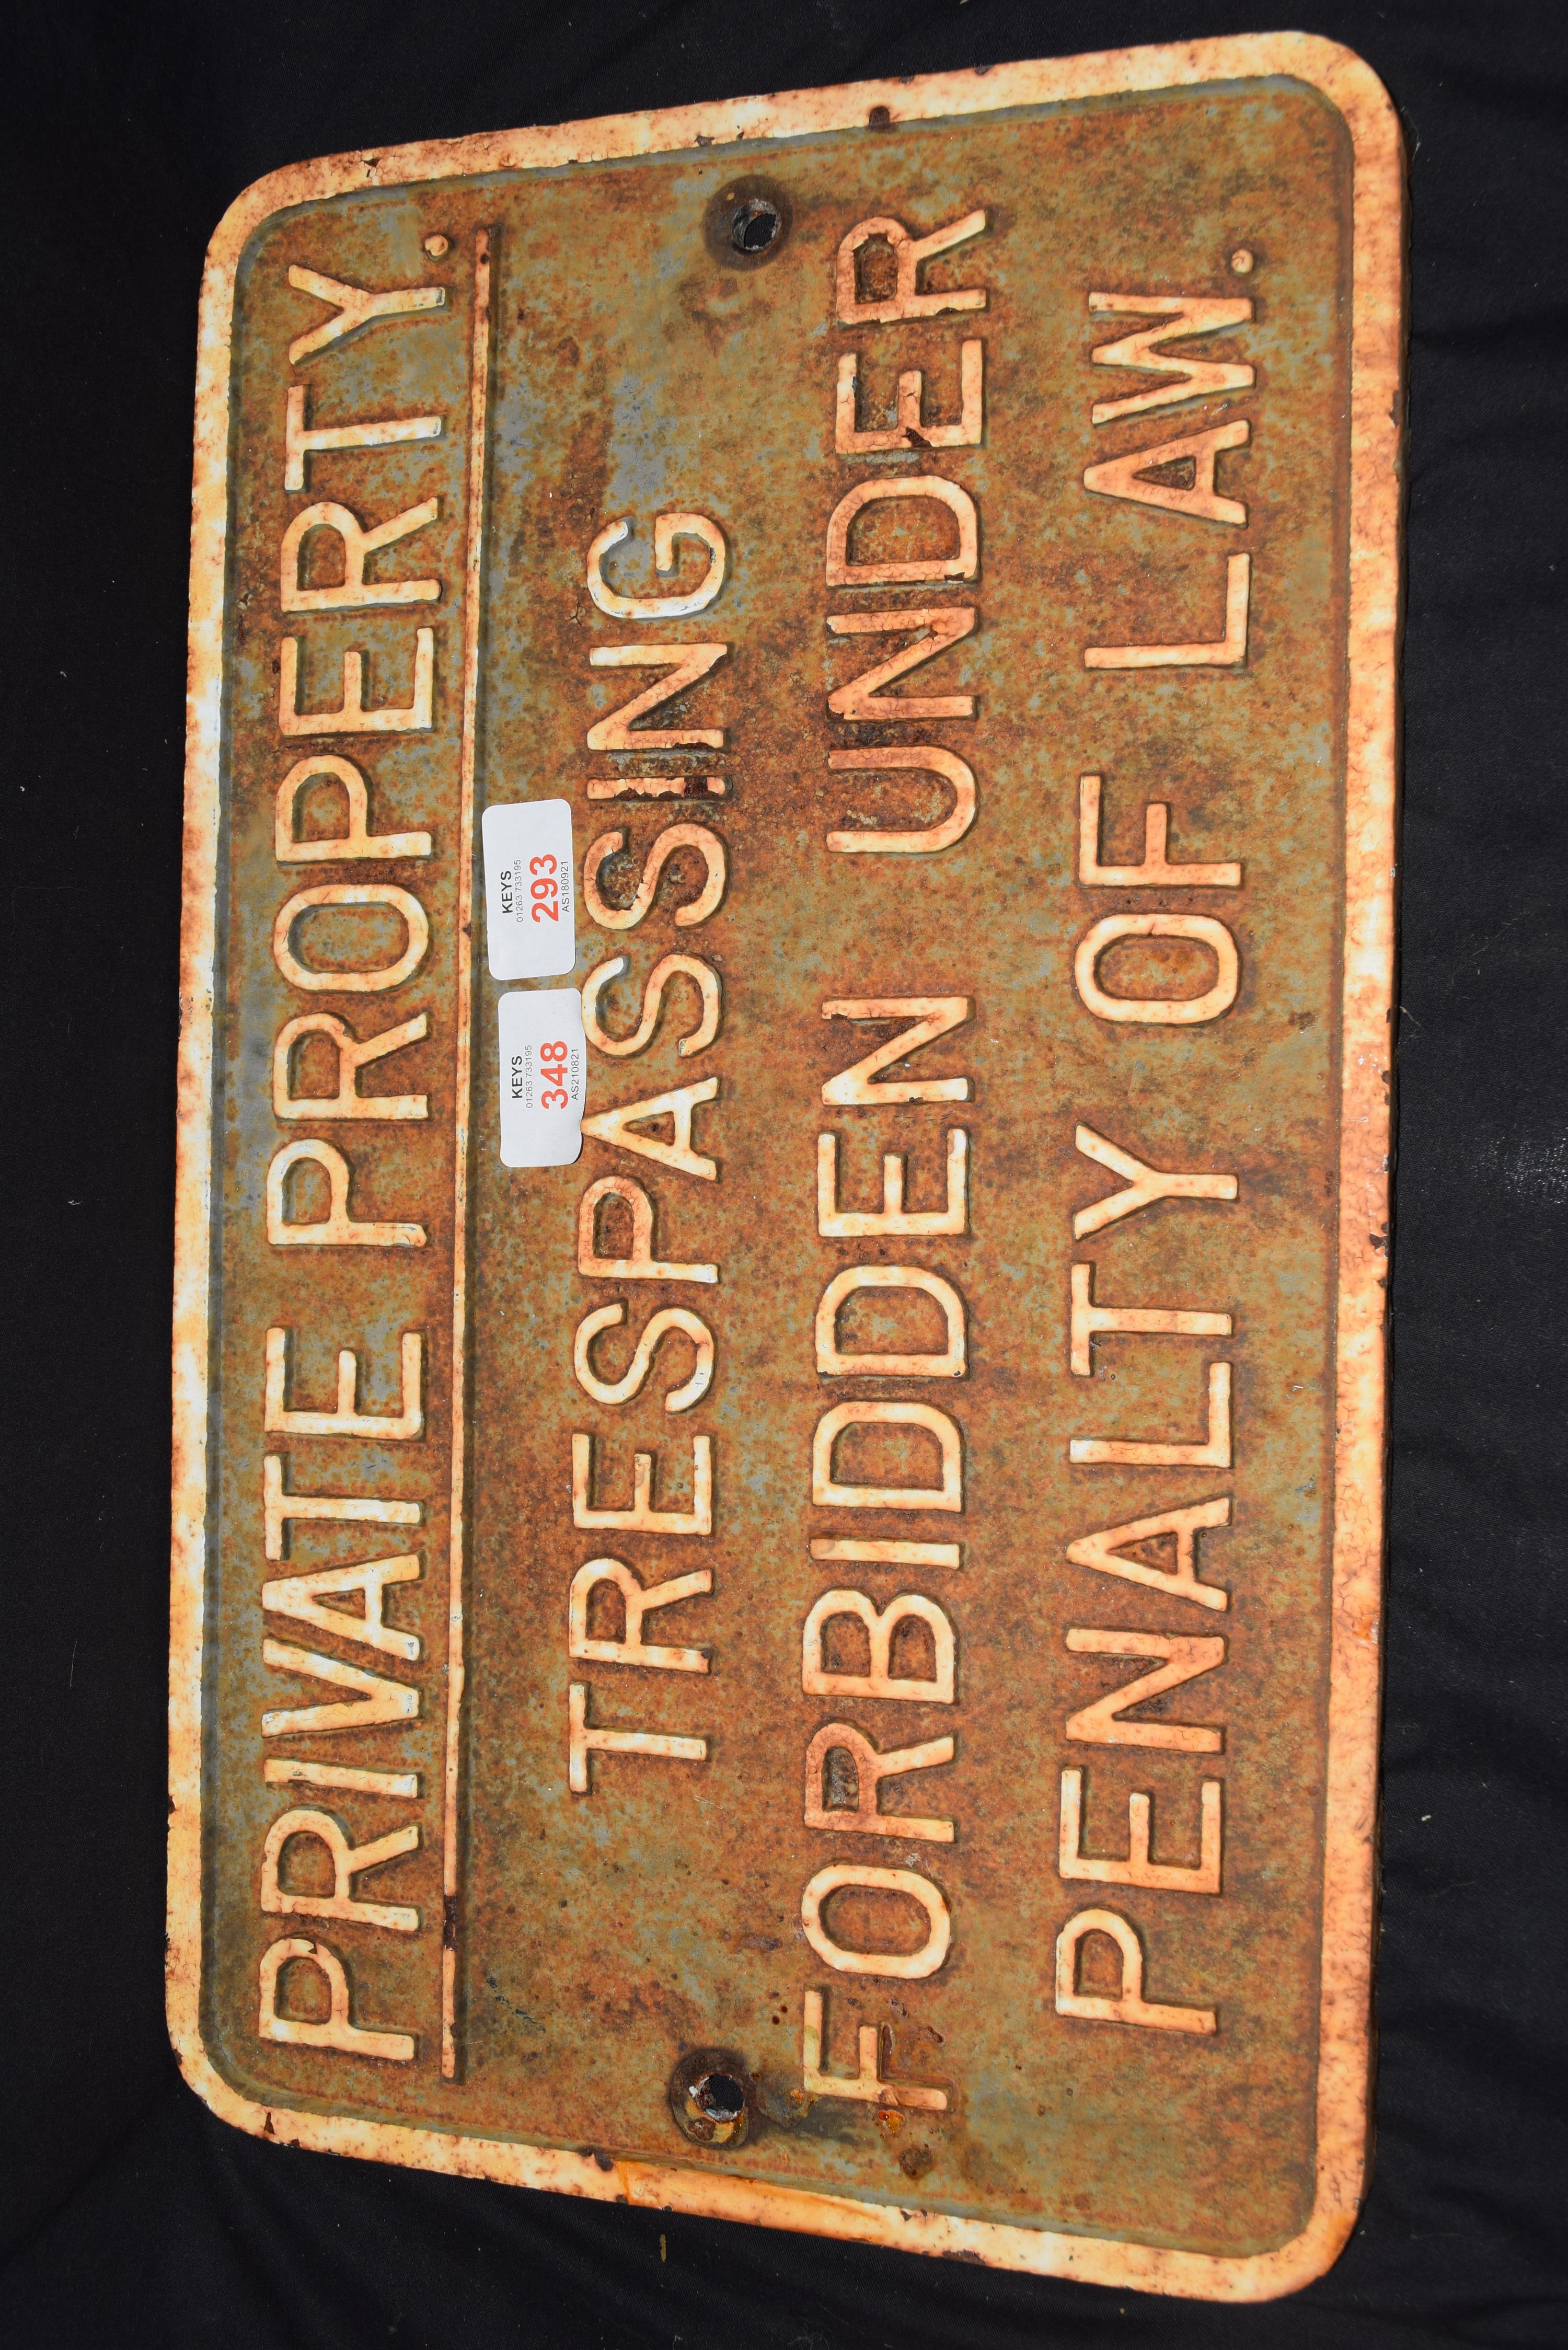 Vintage cast iron plaque marked "Private property. Trespassing forbidden under penalty of law", 45cm